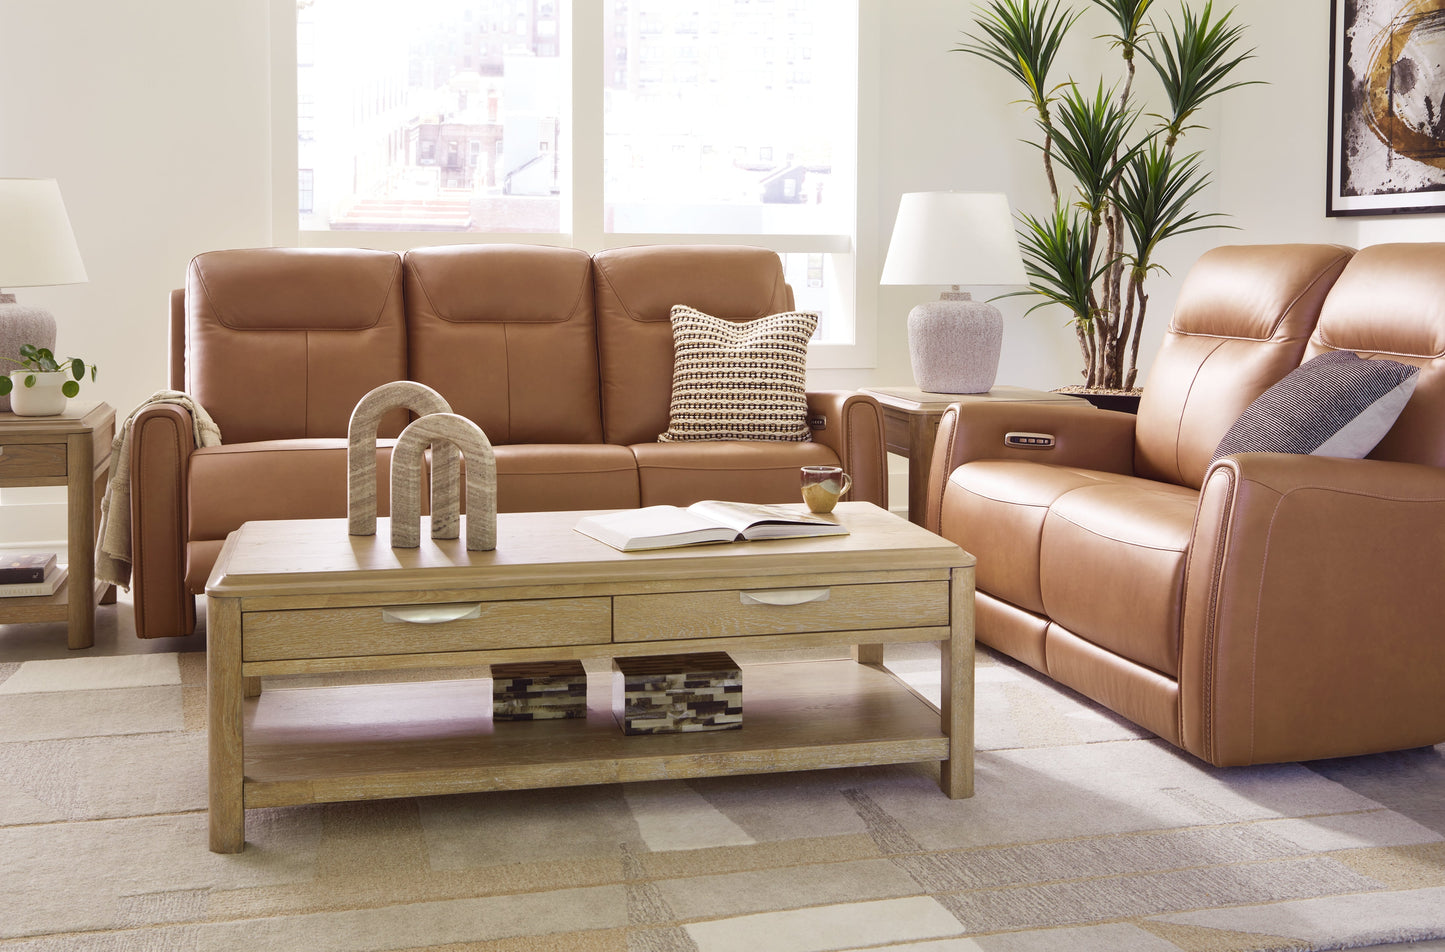 Tryanny Butterscotch Power Reclining Sofa and Loveseat